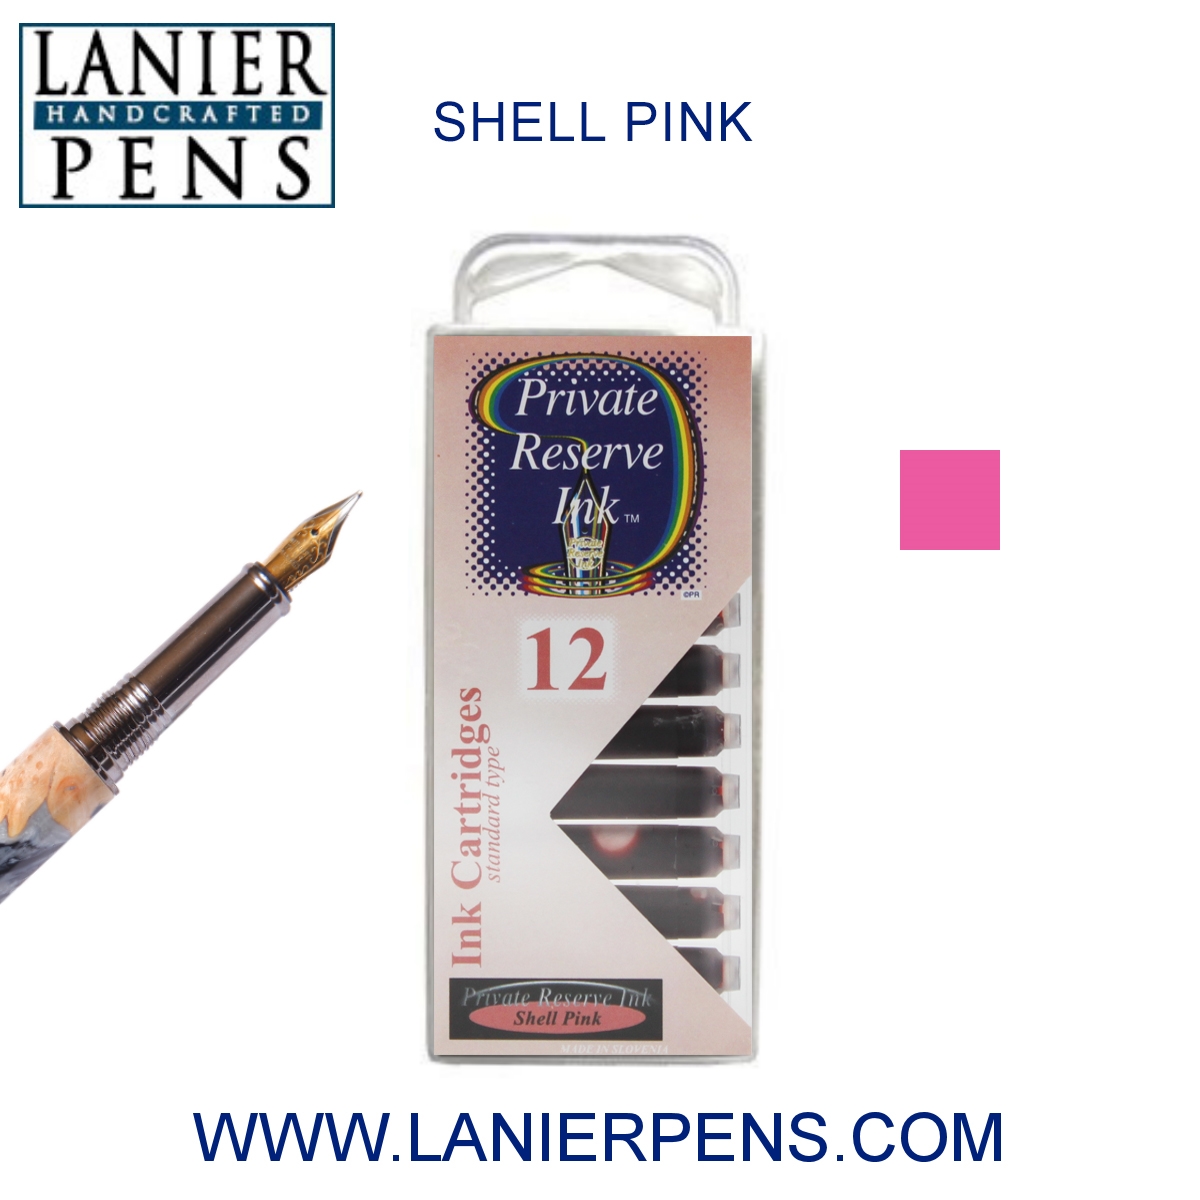 12 Pack - Private Reserve Ink, Universal Fountain Pen Ink Cartridges Clear Case, Shell Pink by Lanier Pens